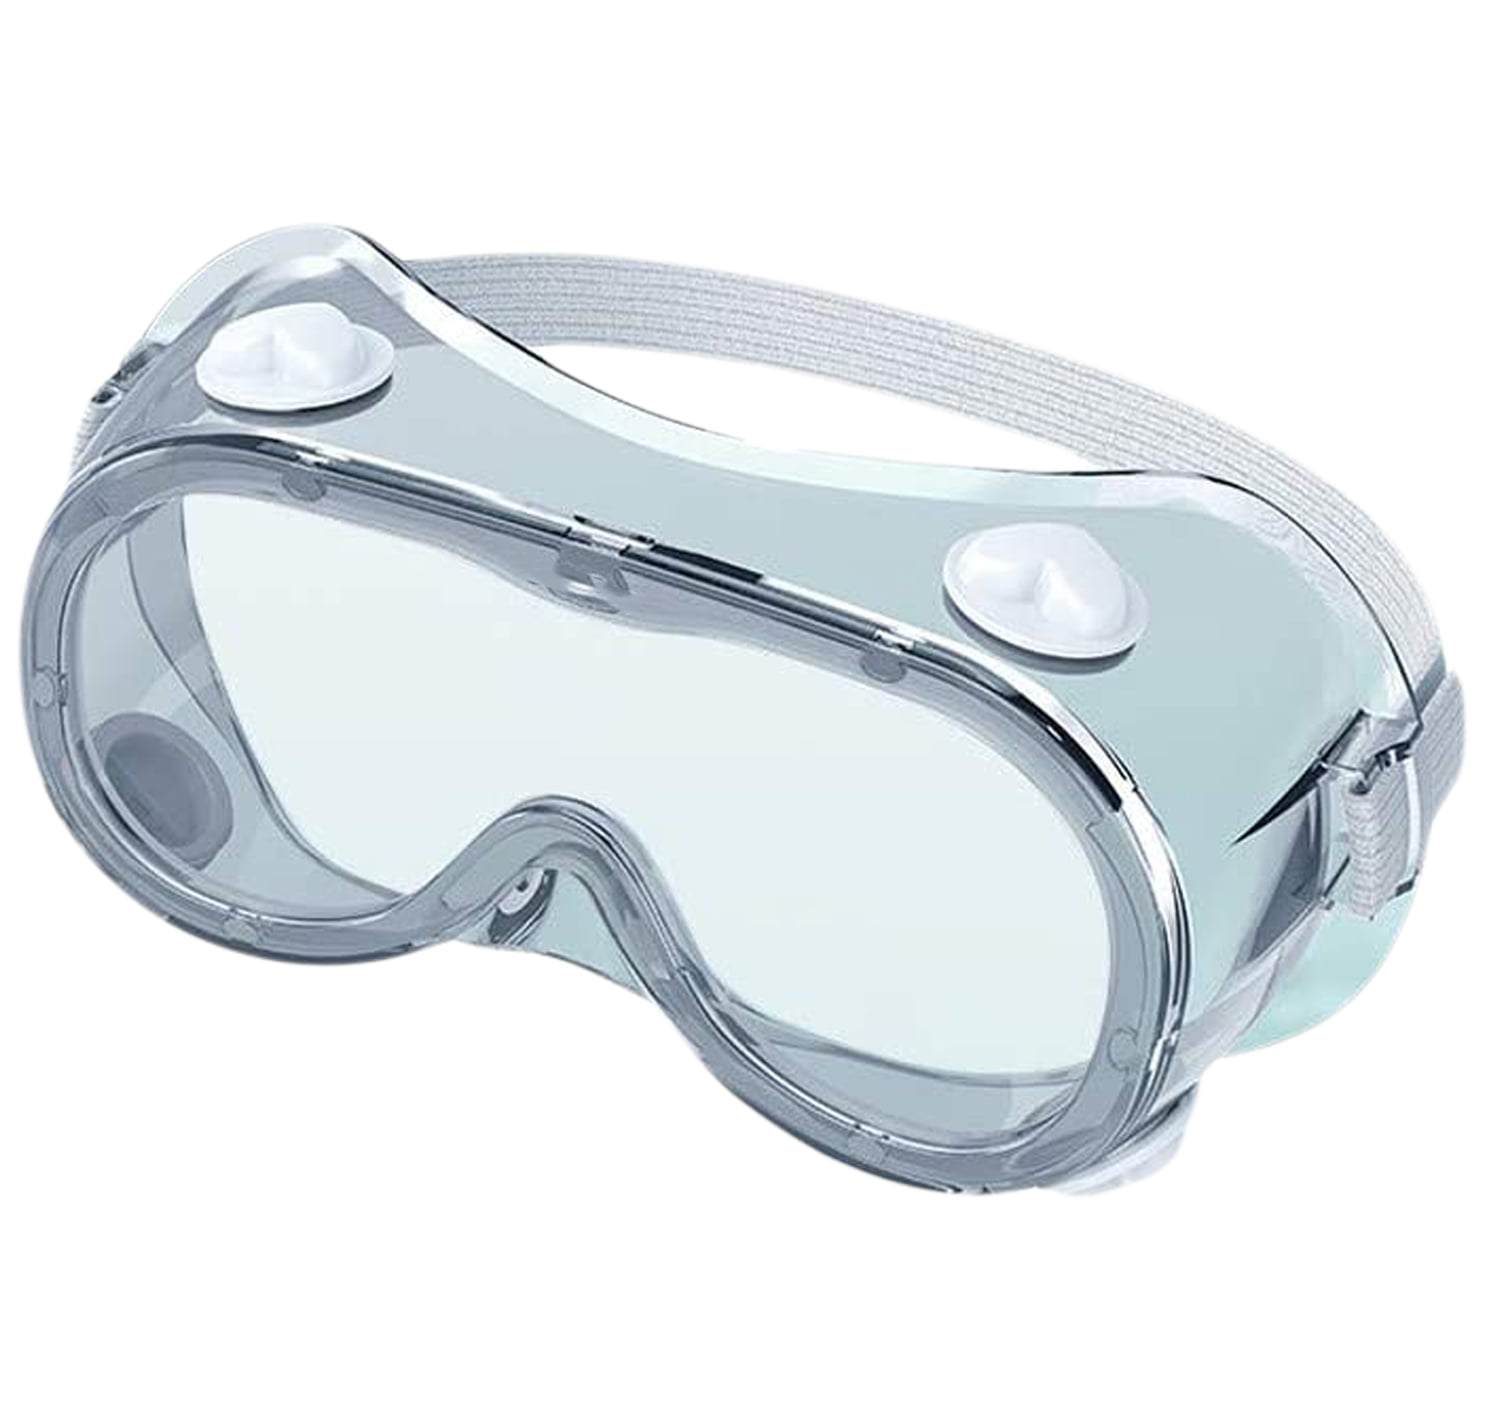 Clear Safety Goggles Glasses Anti Fog Lens Work Lab Protective Chemical 